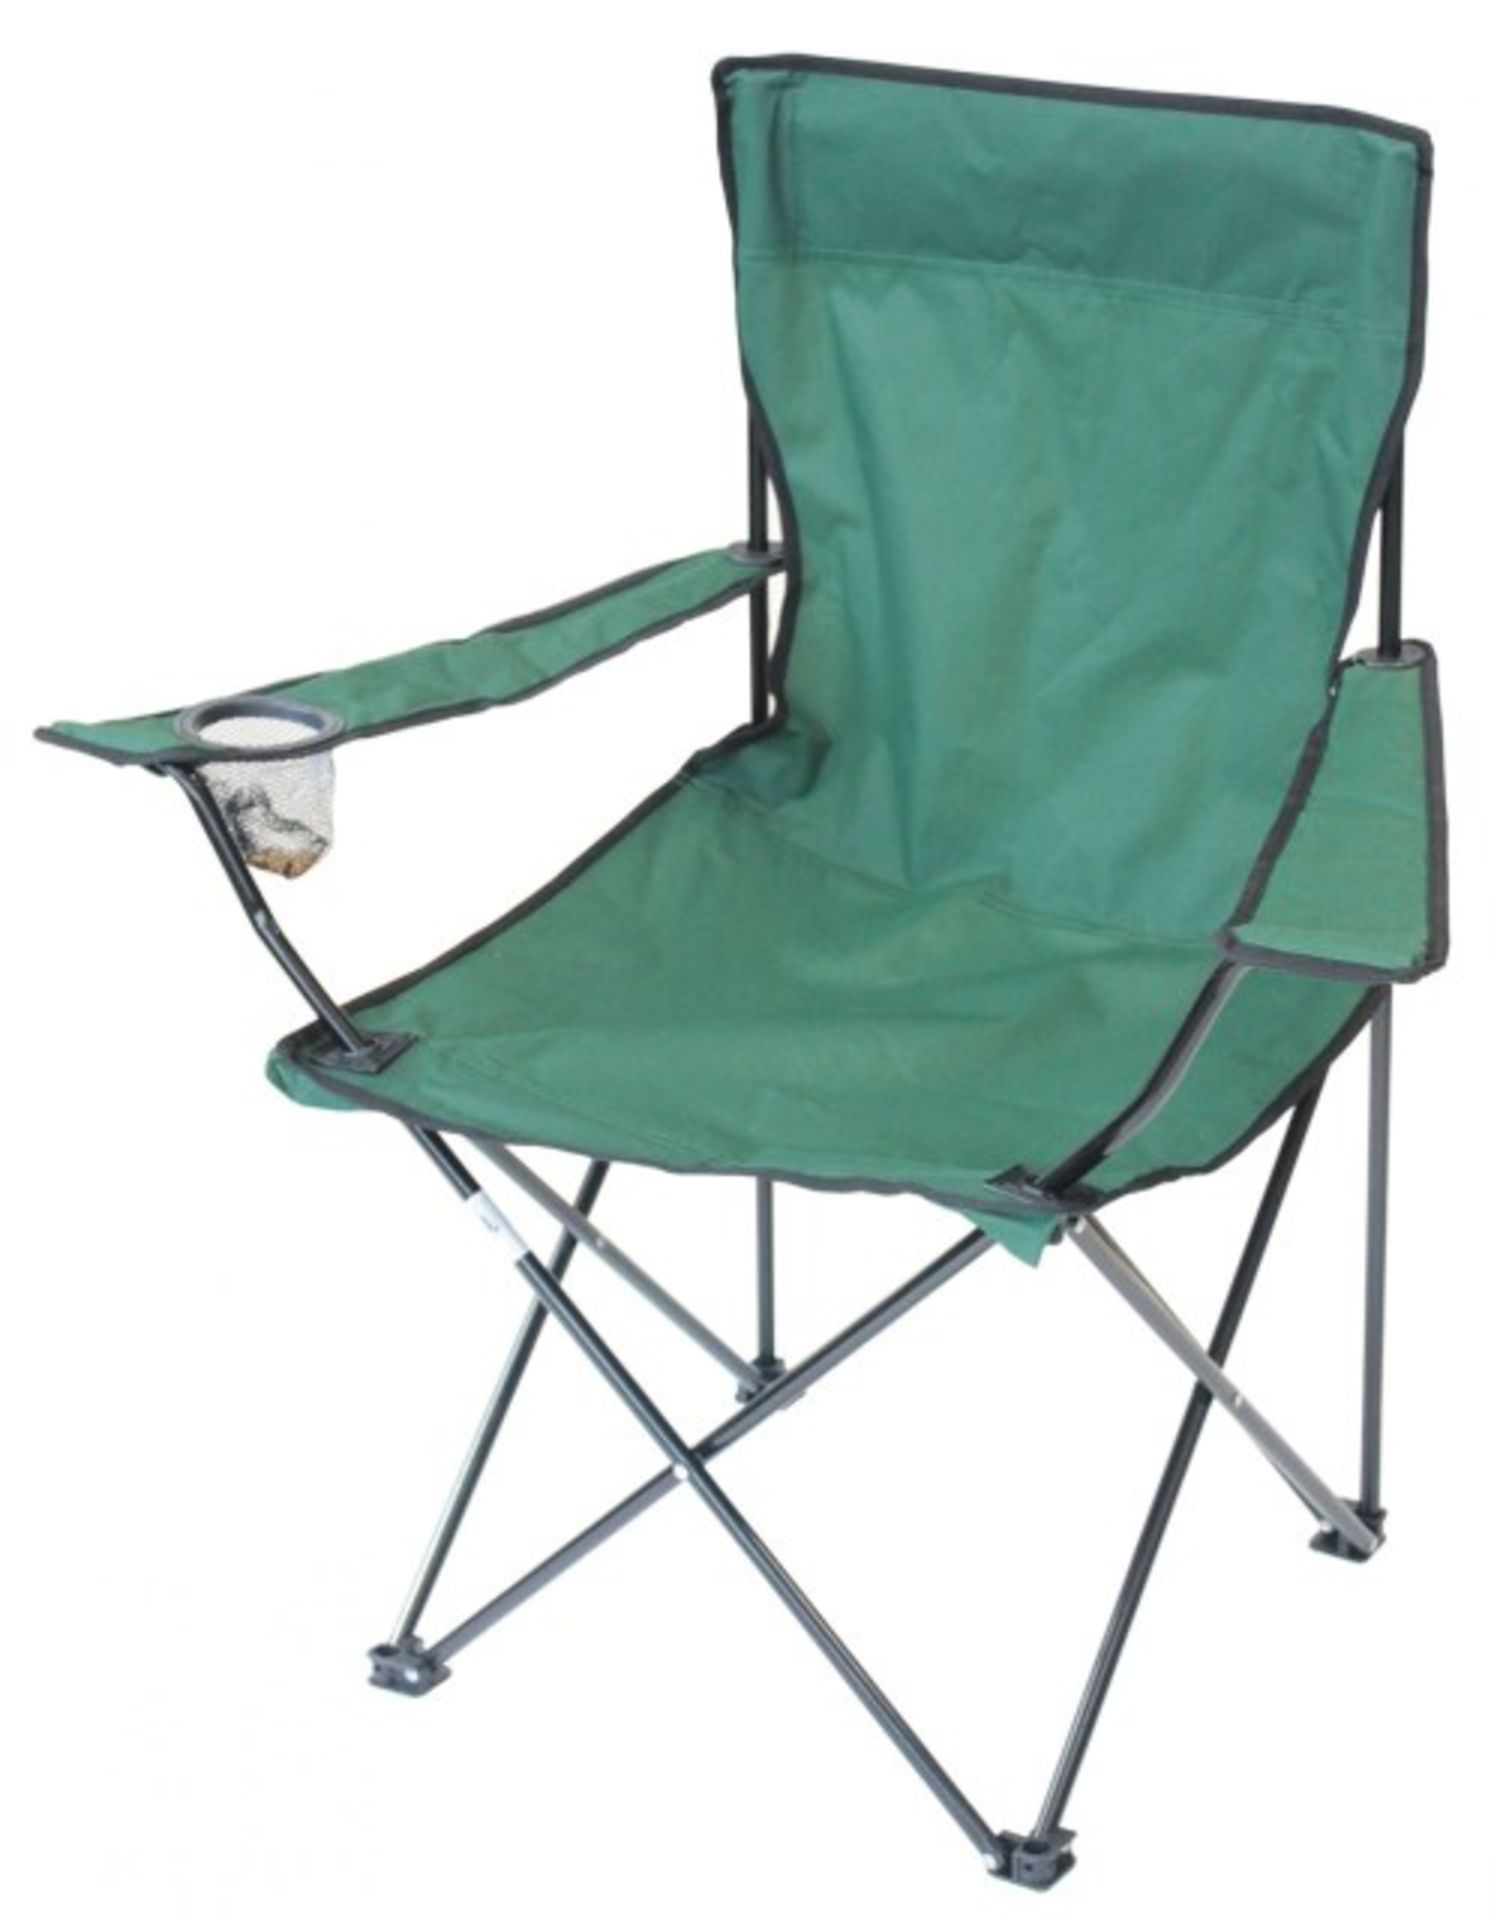 V Brand New Essential Camping Chair With Cup Holder X 2 Bid price to be multiplied by Two